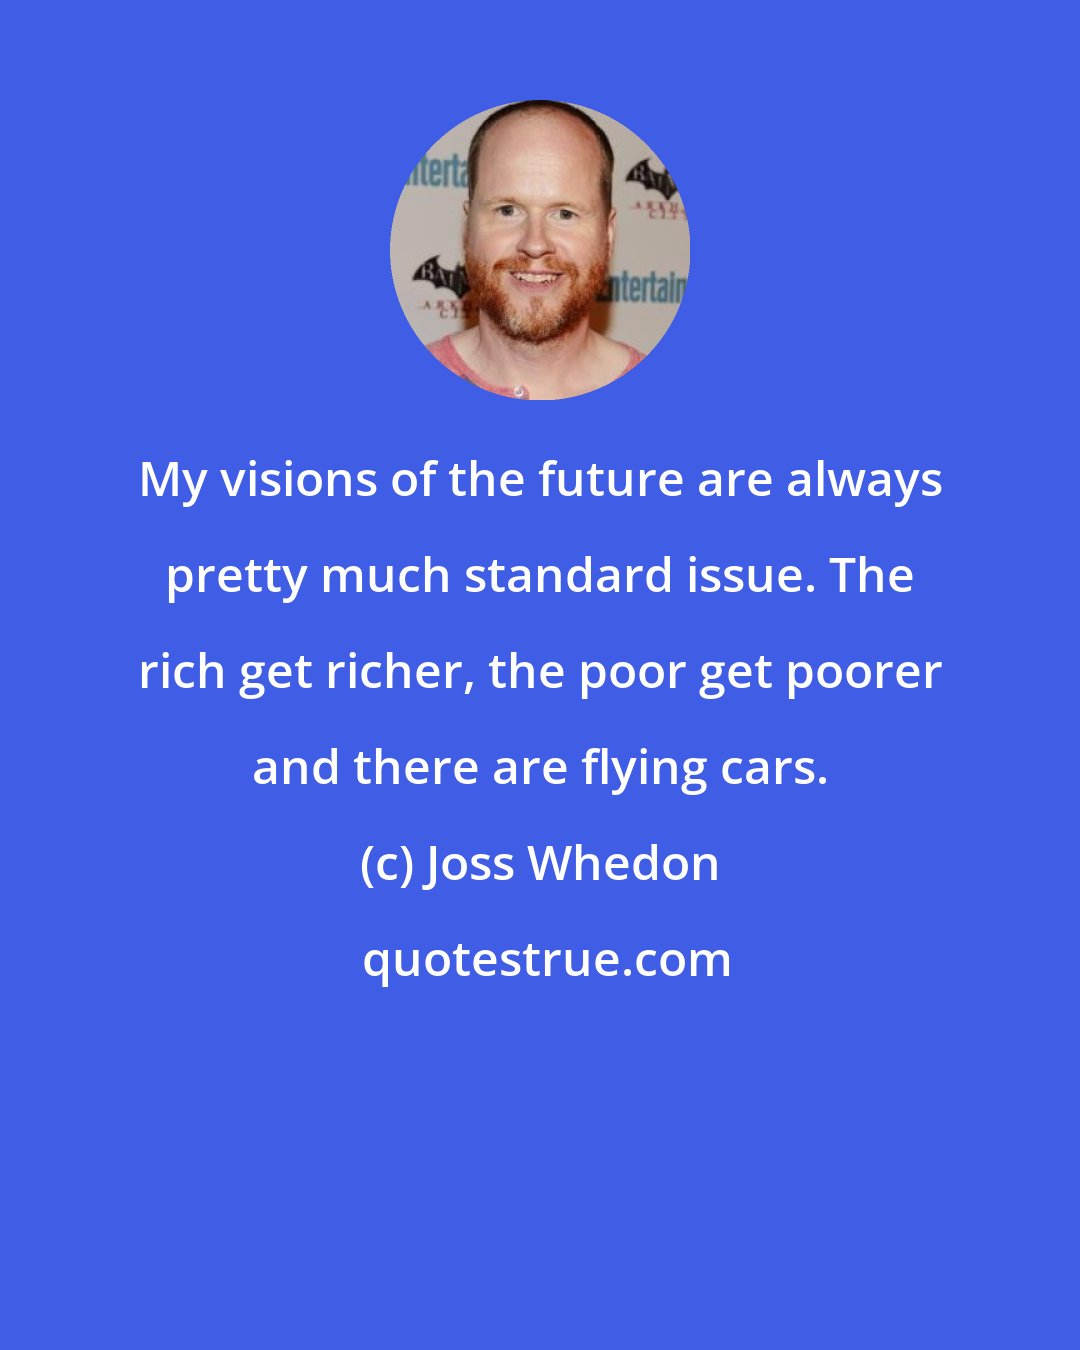 Joss Whedon: My visions of the future are always pretty much standard issue. The rich get richer, the poor get poorer and there are flying cars.